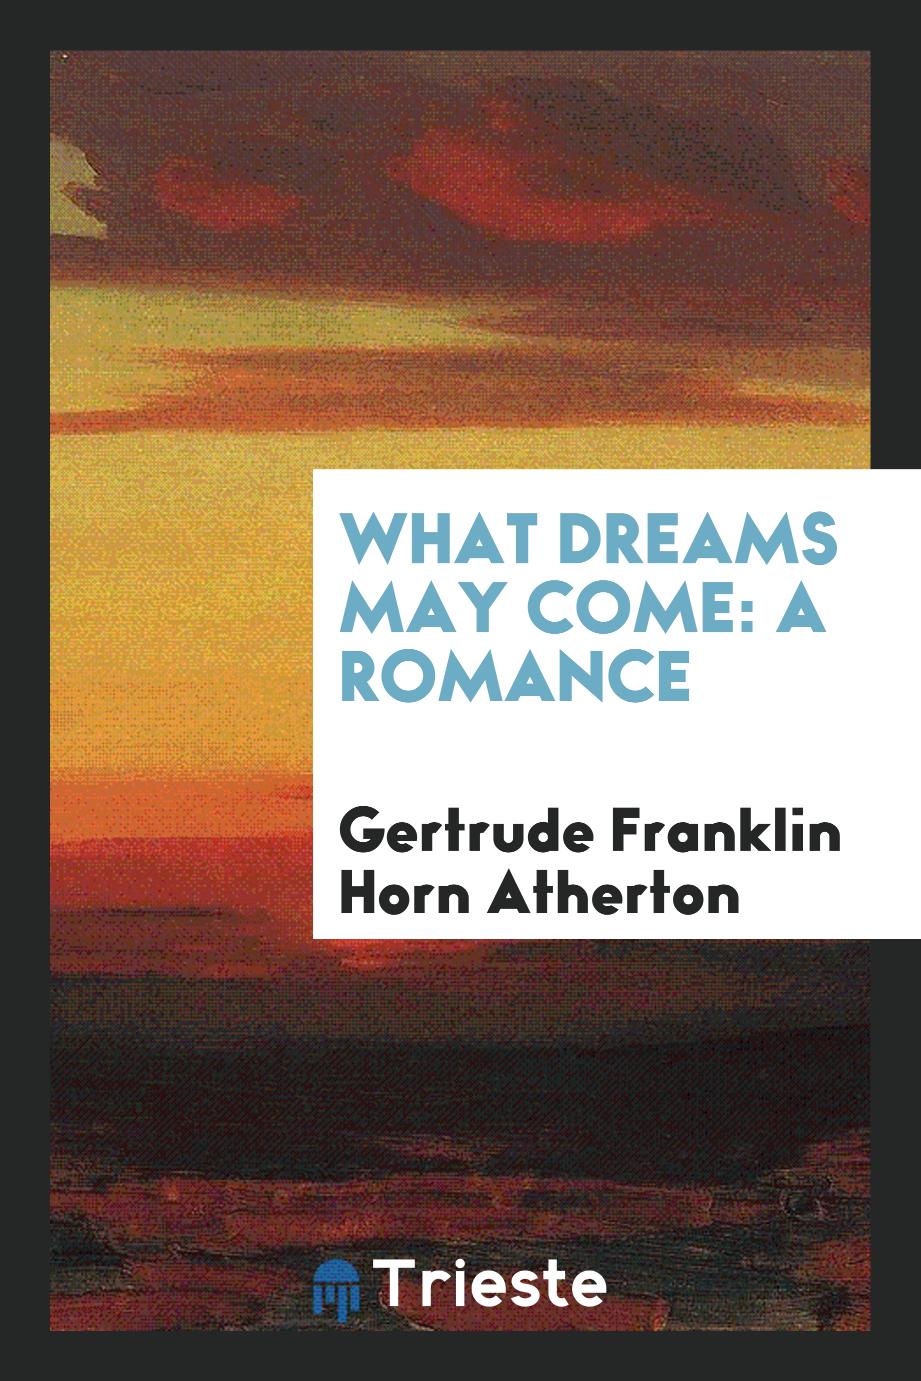 What dreams may come: a romance